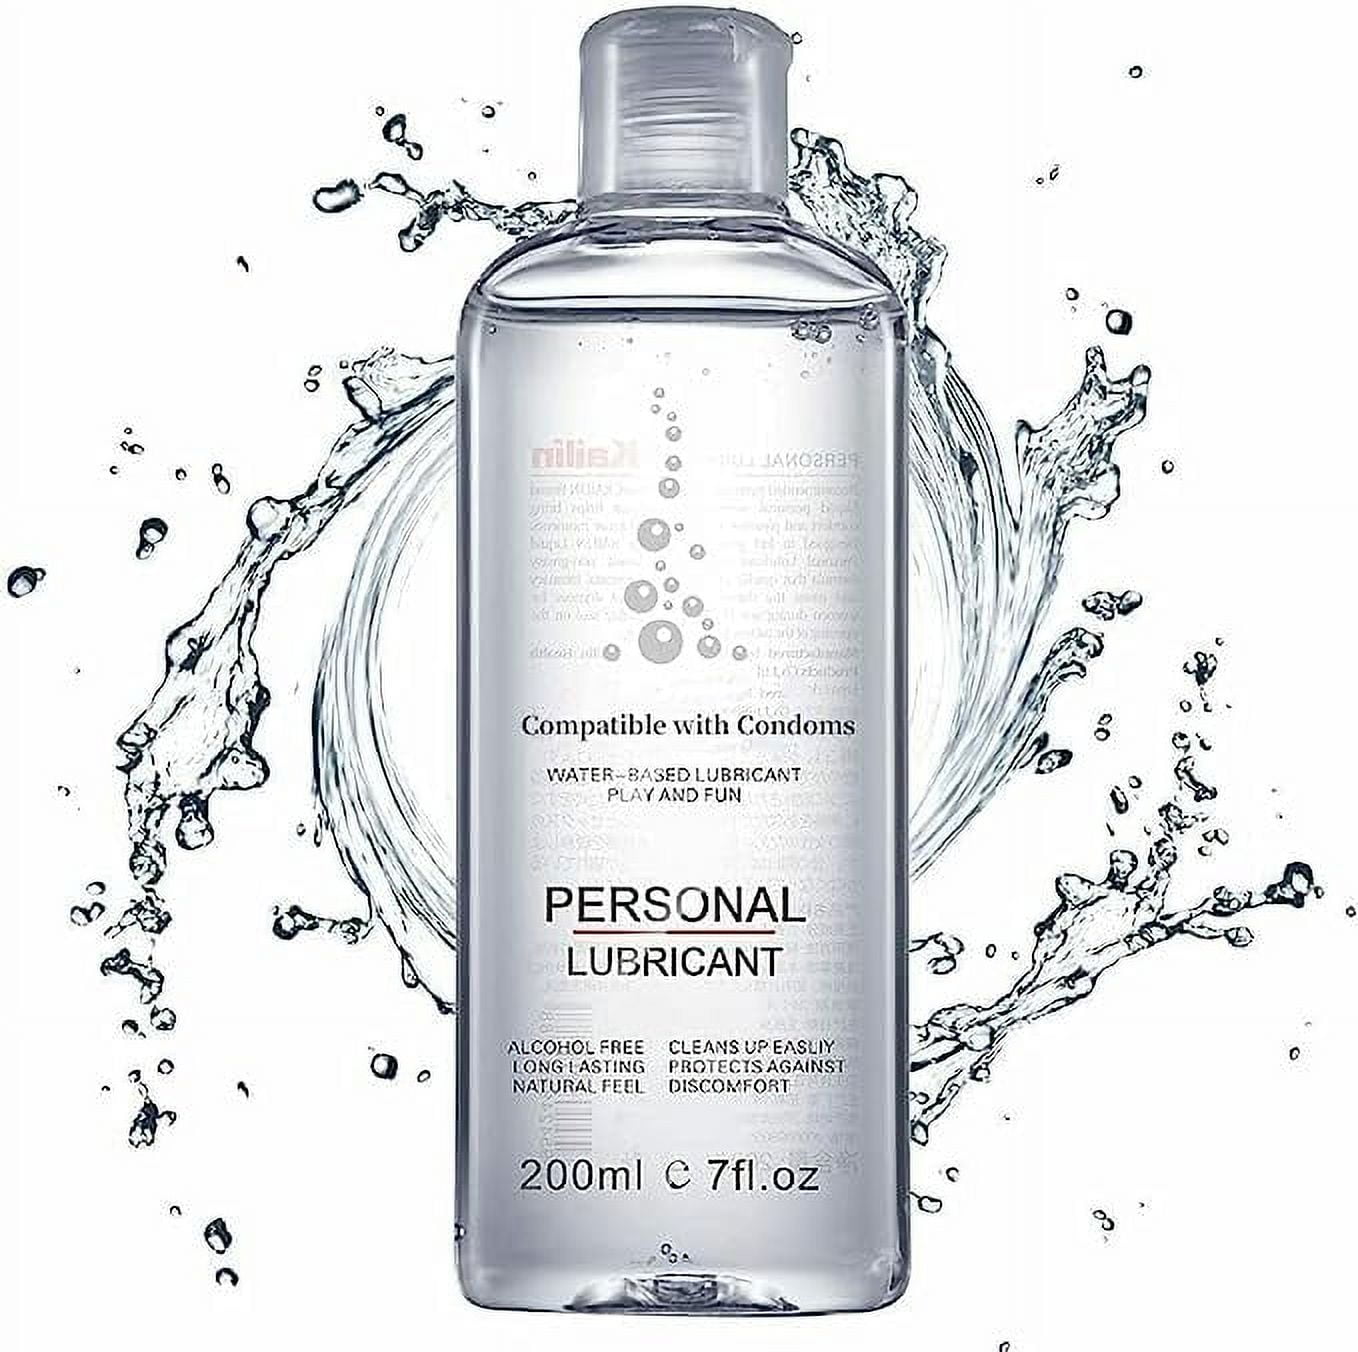 Sex Lube Personal Lubricant Water Based Long Lasting Adult Lube for Men Women and Couples, Personal Lube, 7Oz/200ml pic